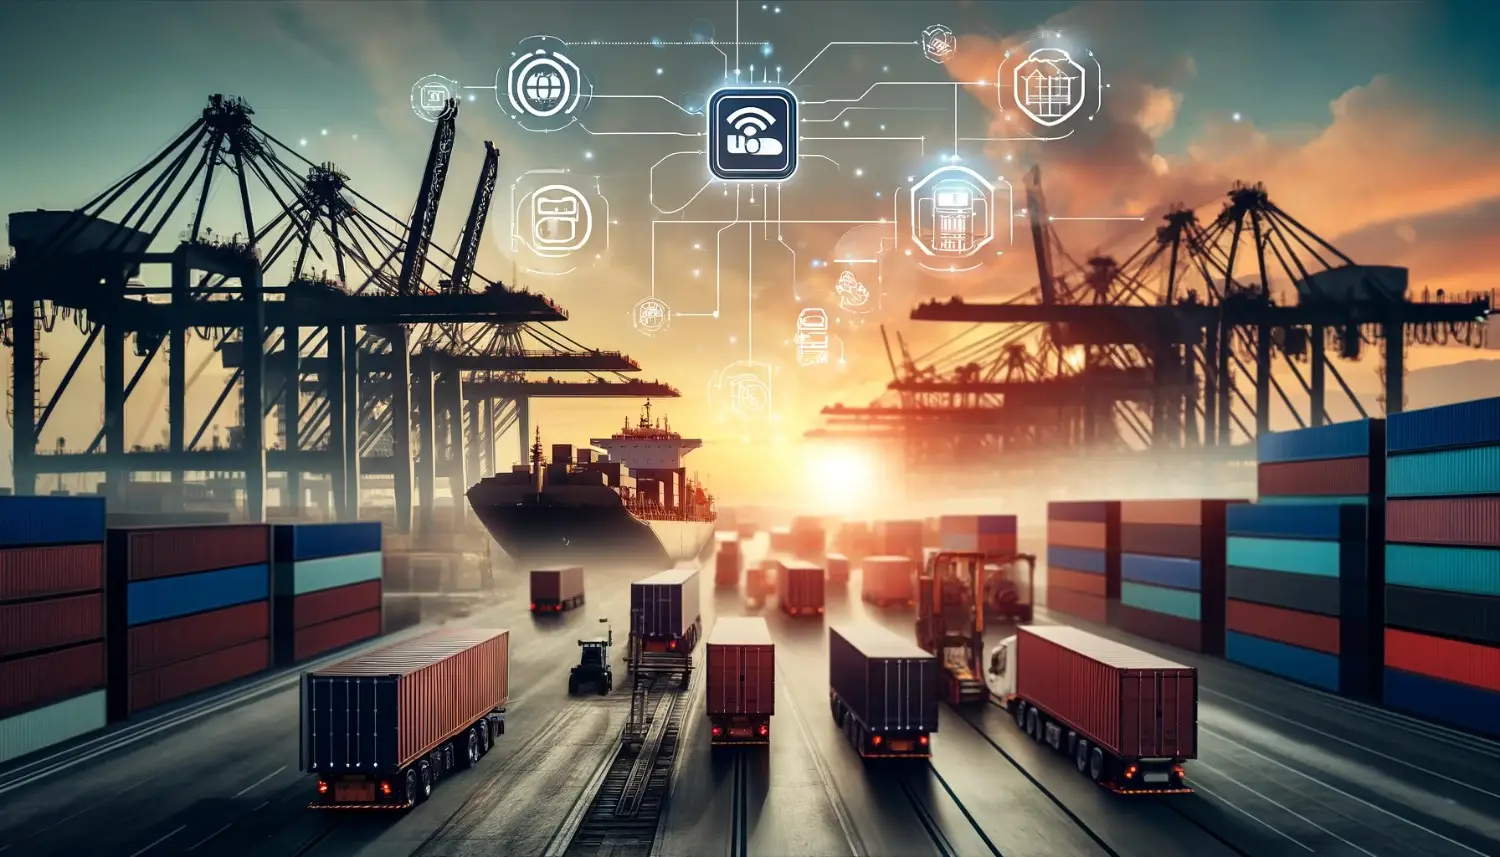 Internet of Things (IoT) in the transport and logistics industry.